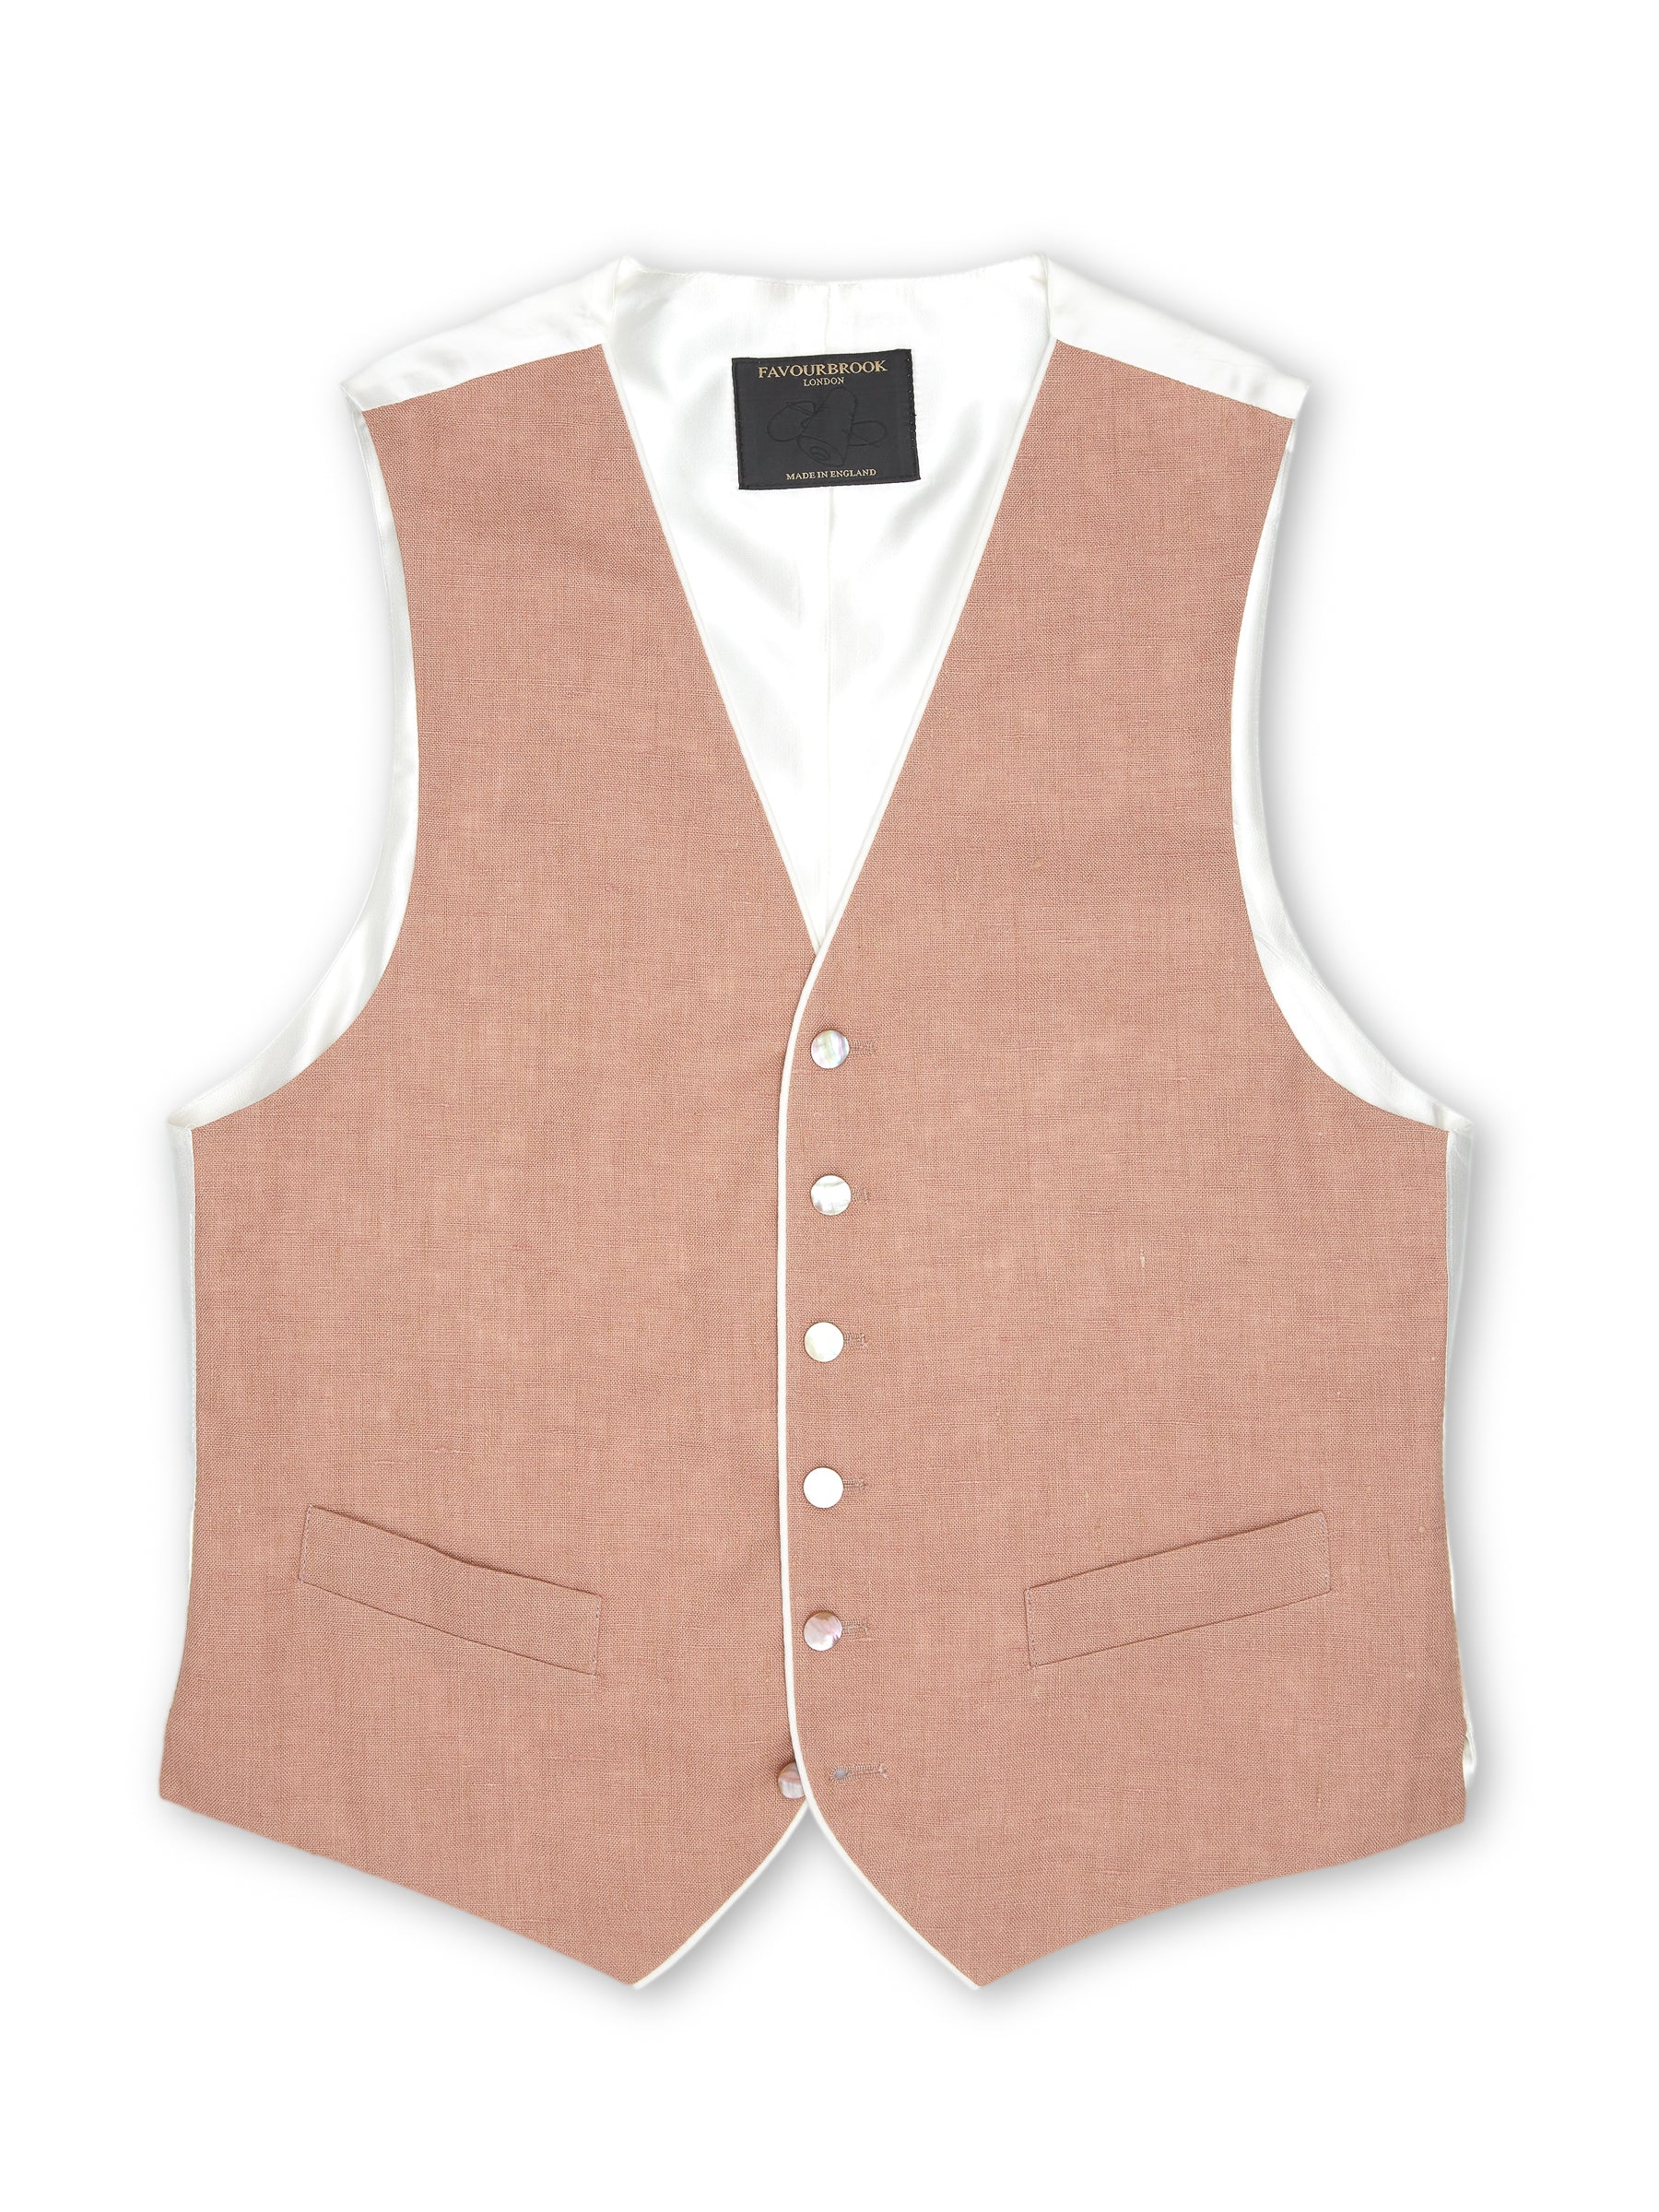 Sidmouth Pink Linen Single Breasted 6 Button Piped Waistcoat